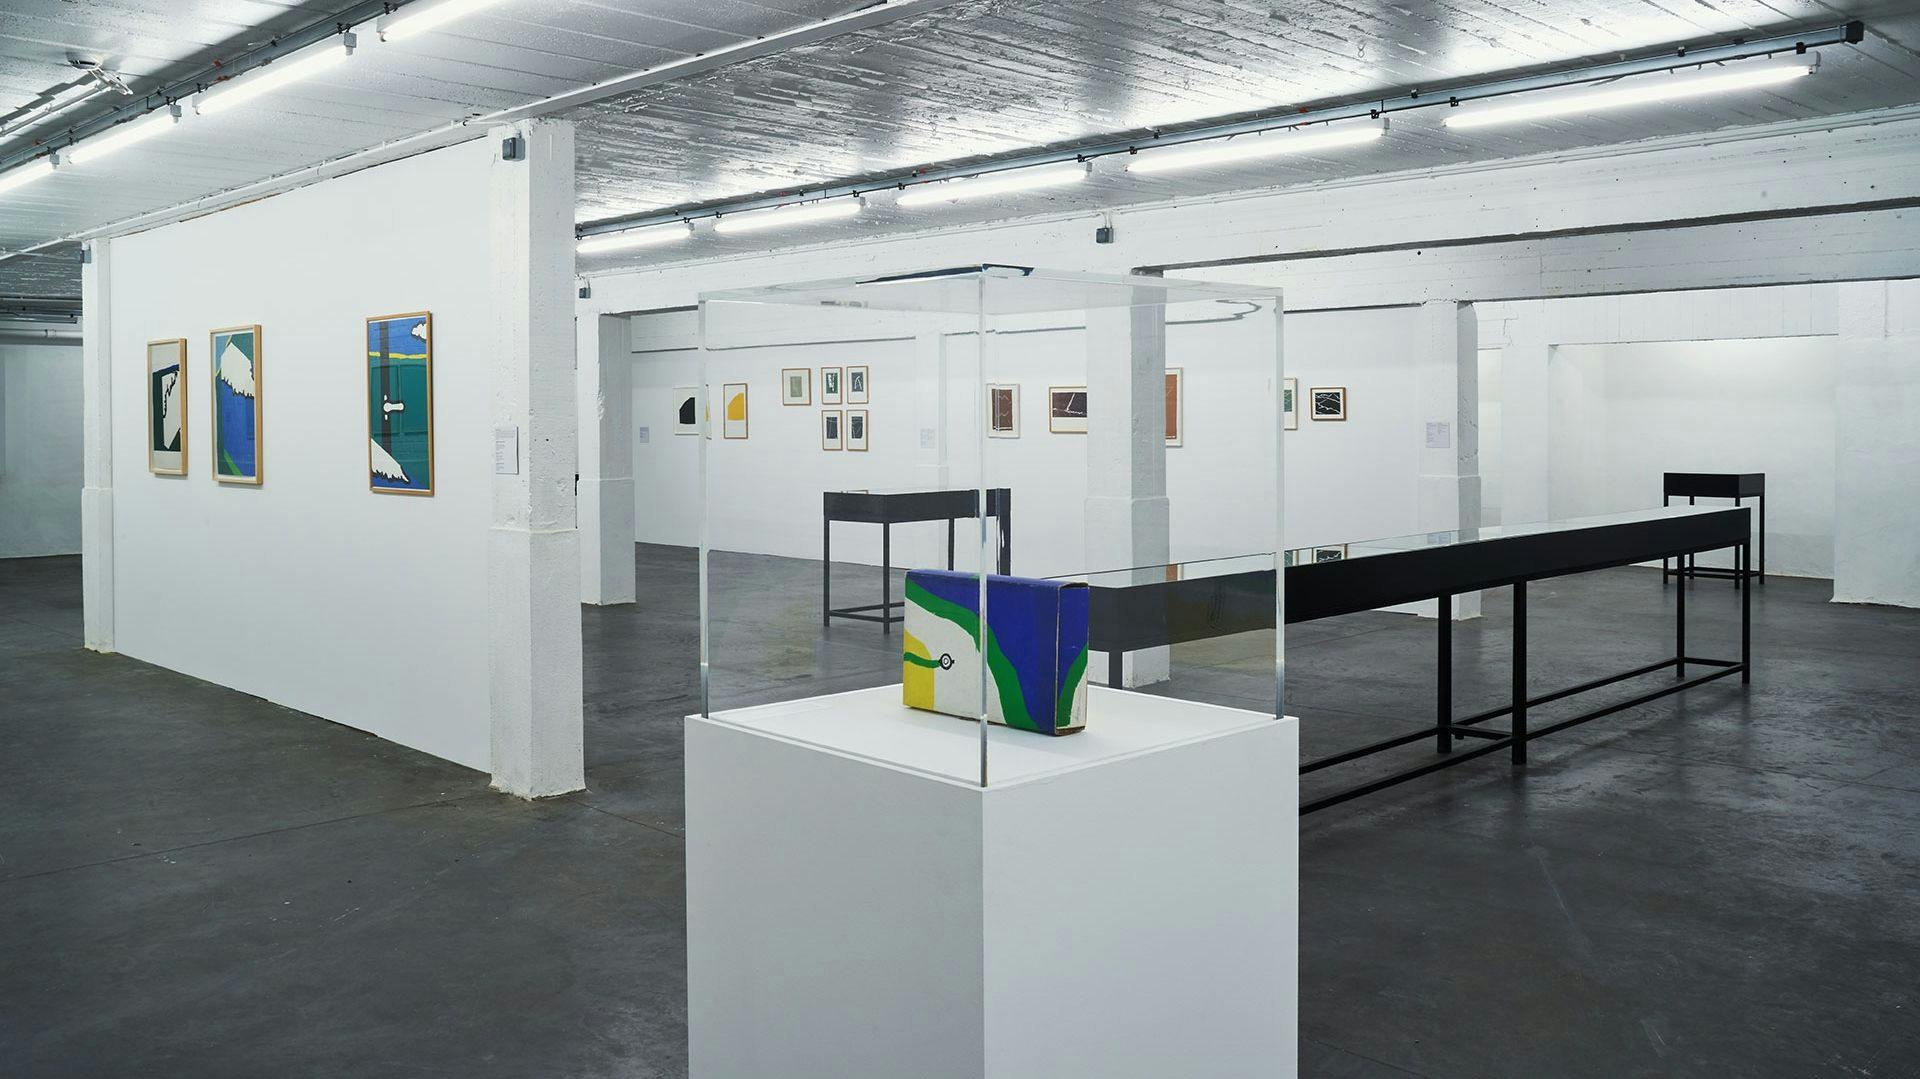 Installation view of the exhibition Raoul De Keyser in Print: Silkscreens, Lithographs, Linocuts, and Etchings at CC Strombeek in Grimbergen, Belgium, dated 2018